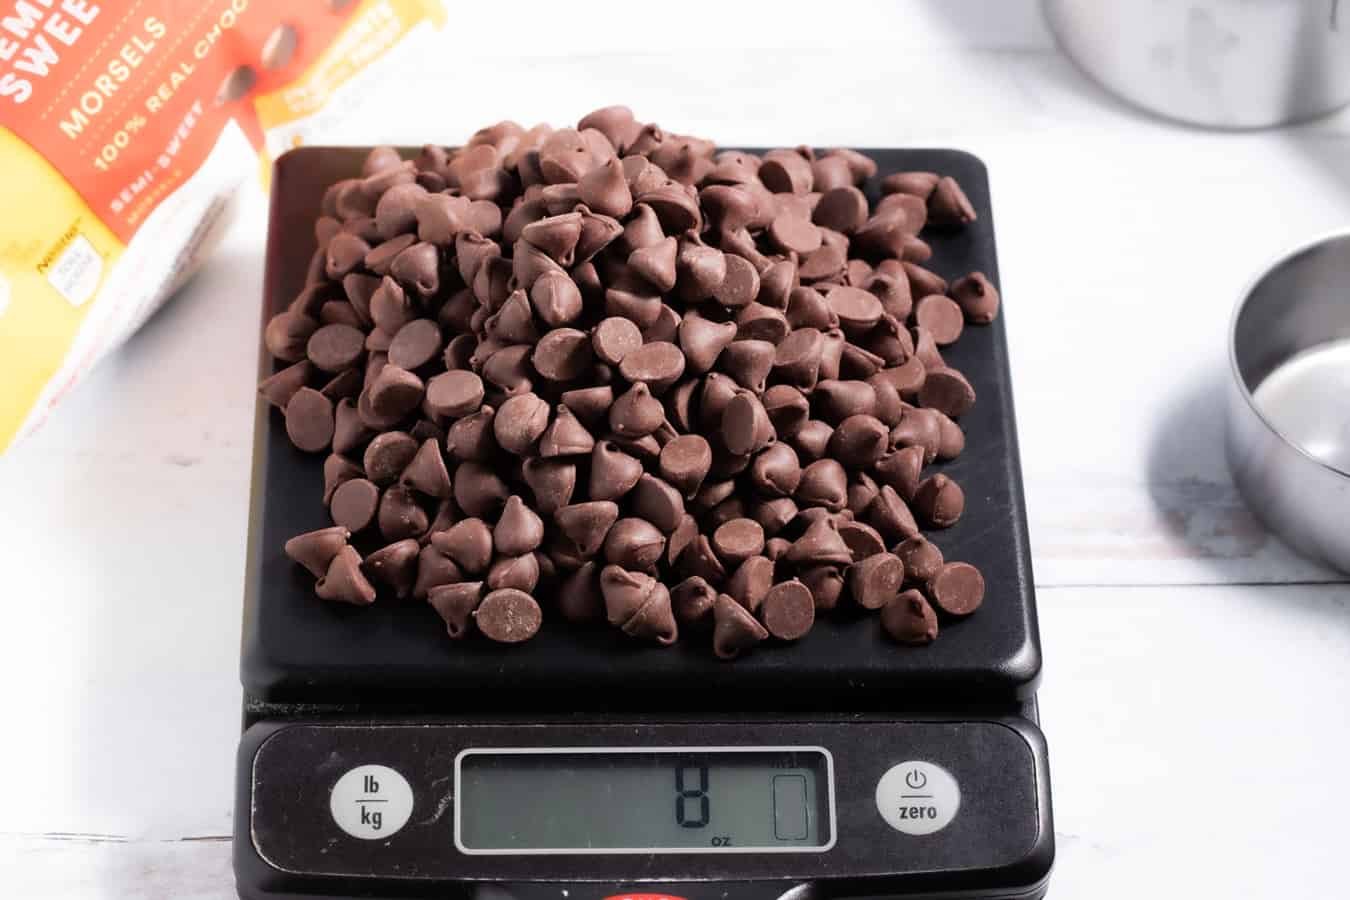 8 oz of chocolate chips on a kitchen scale